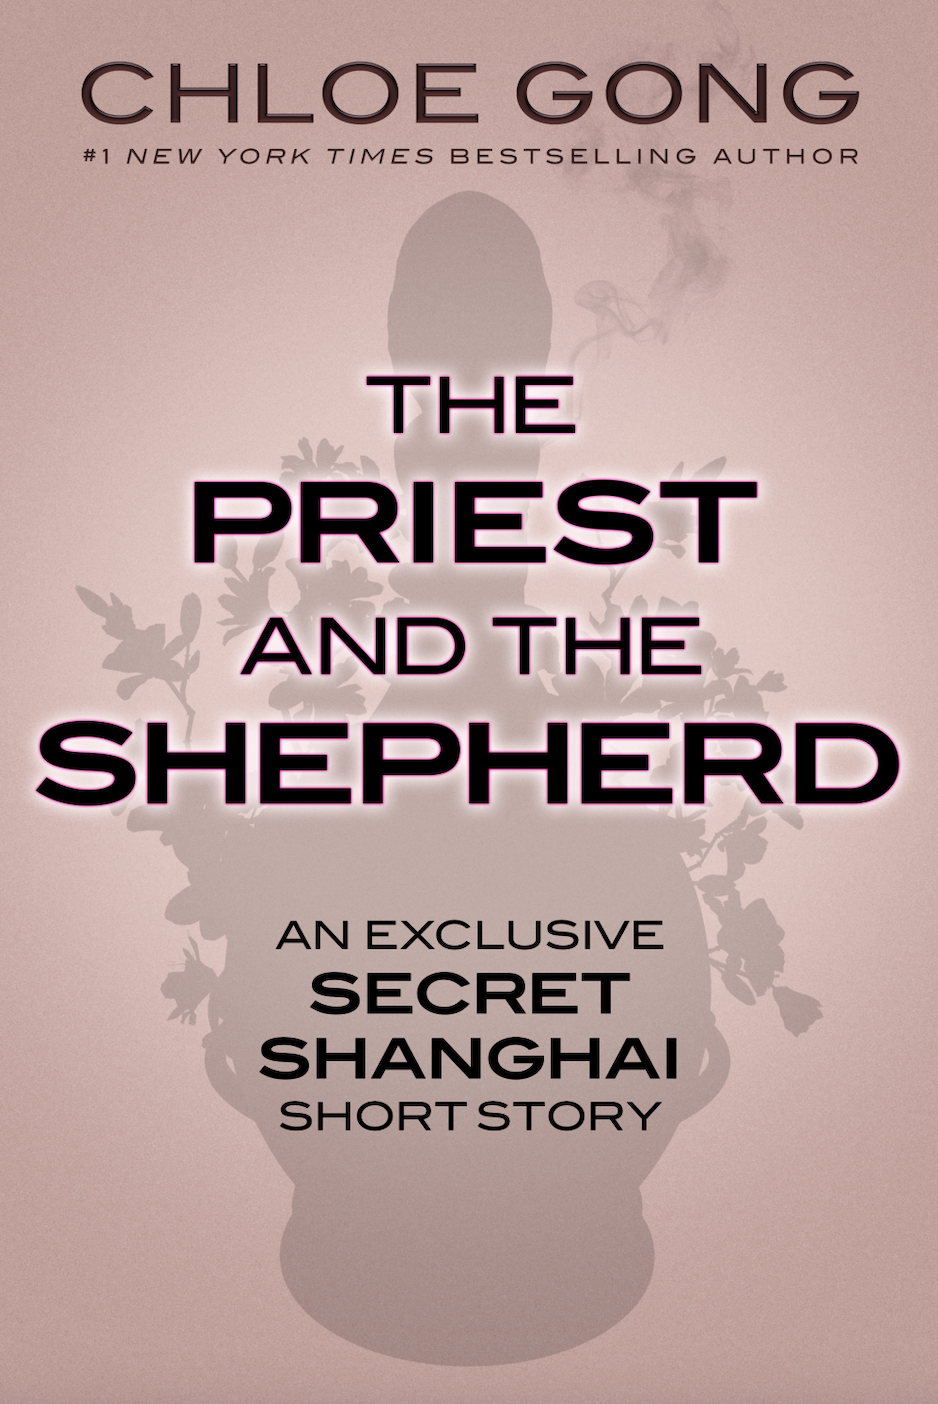 The Priest and the Shepherd